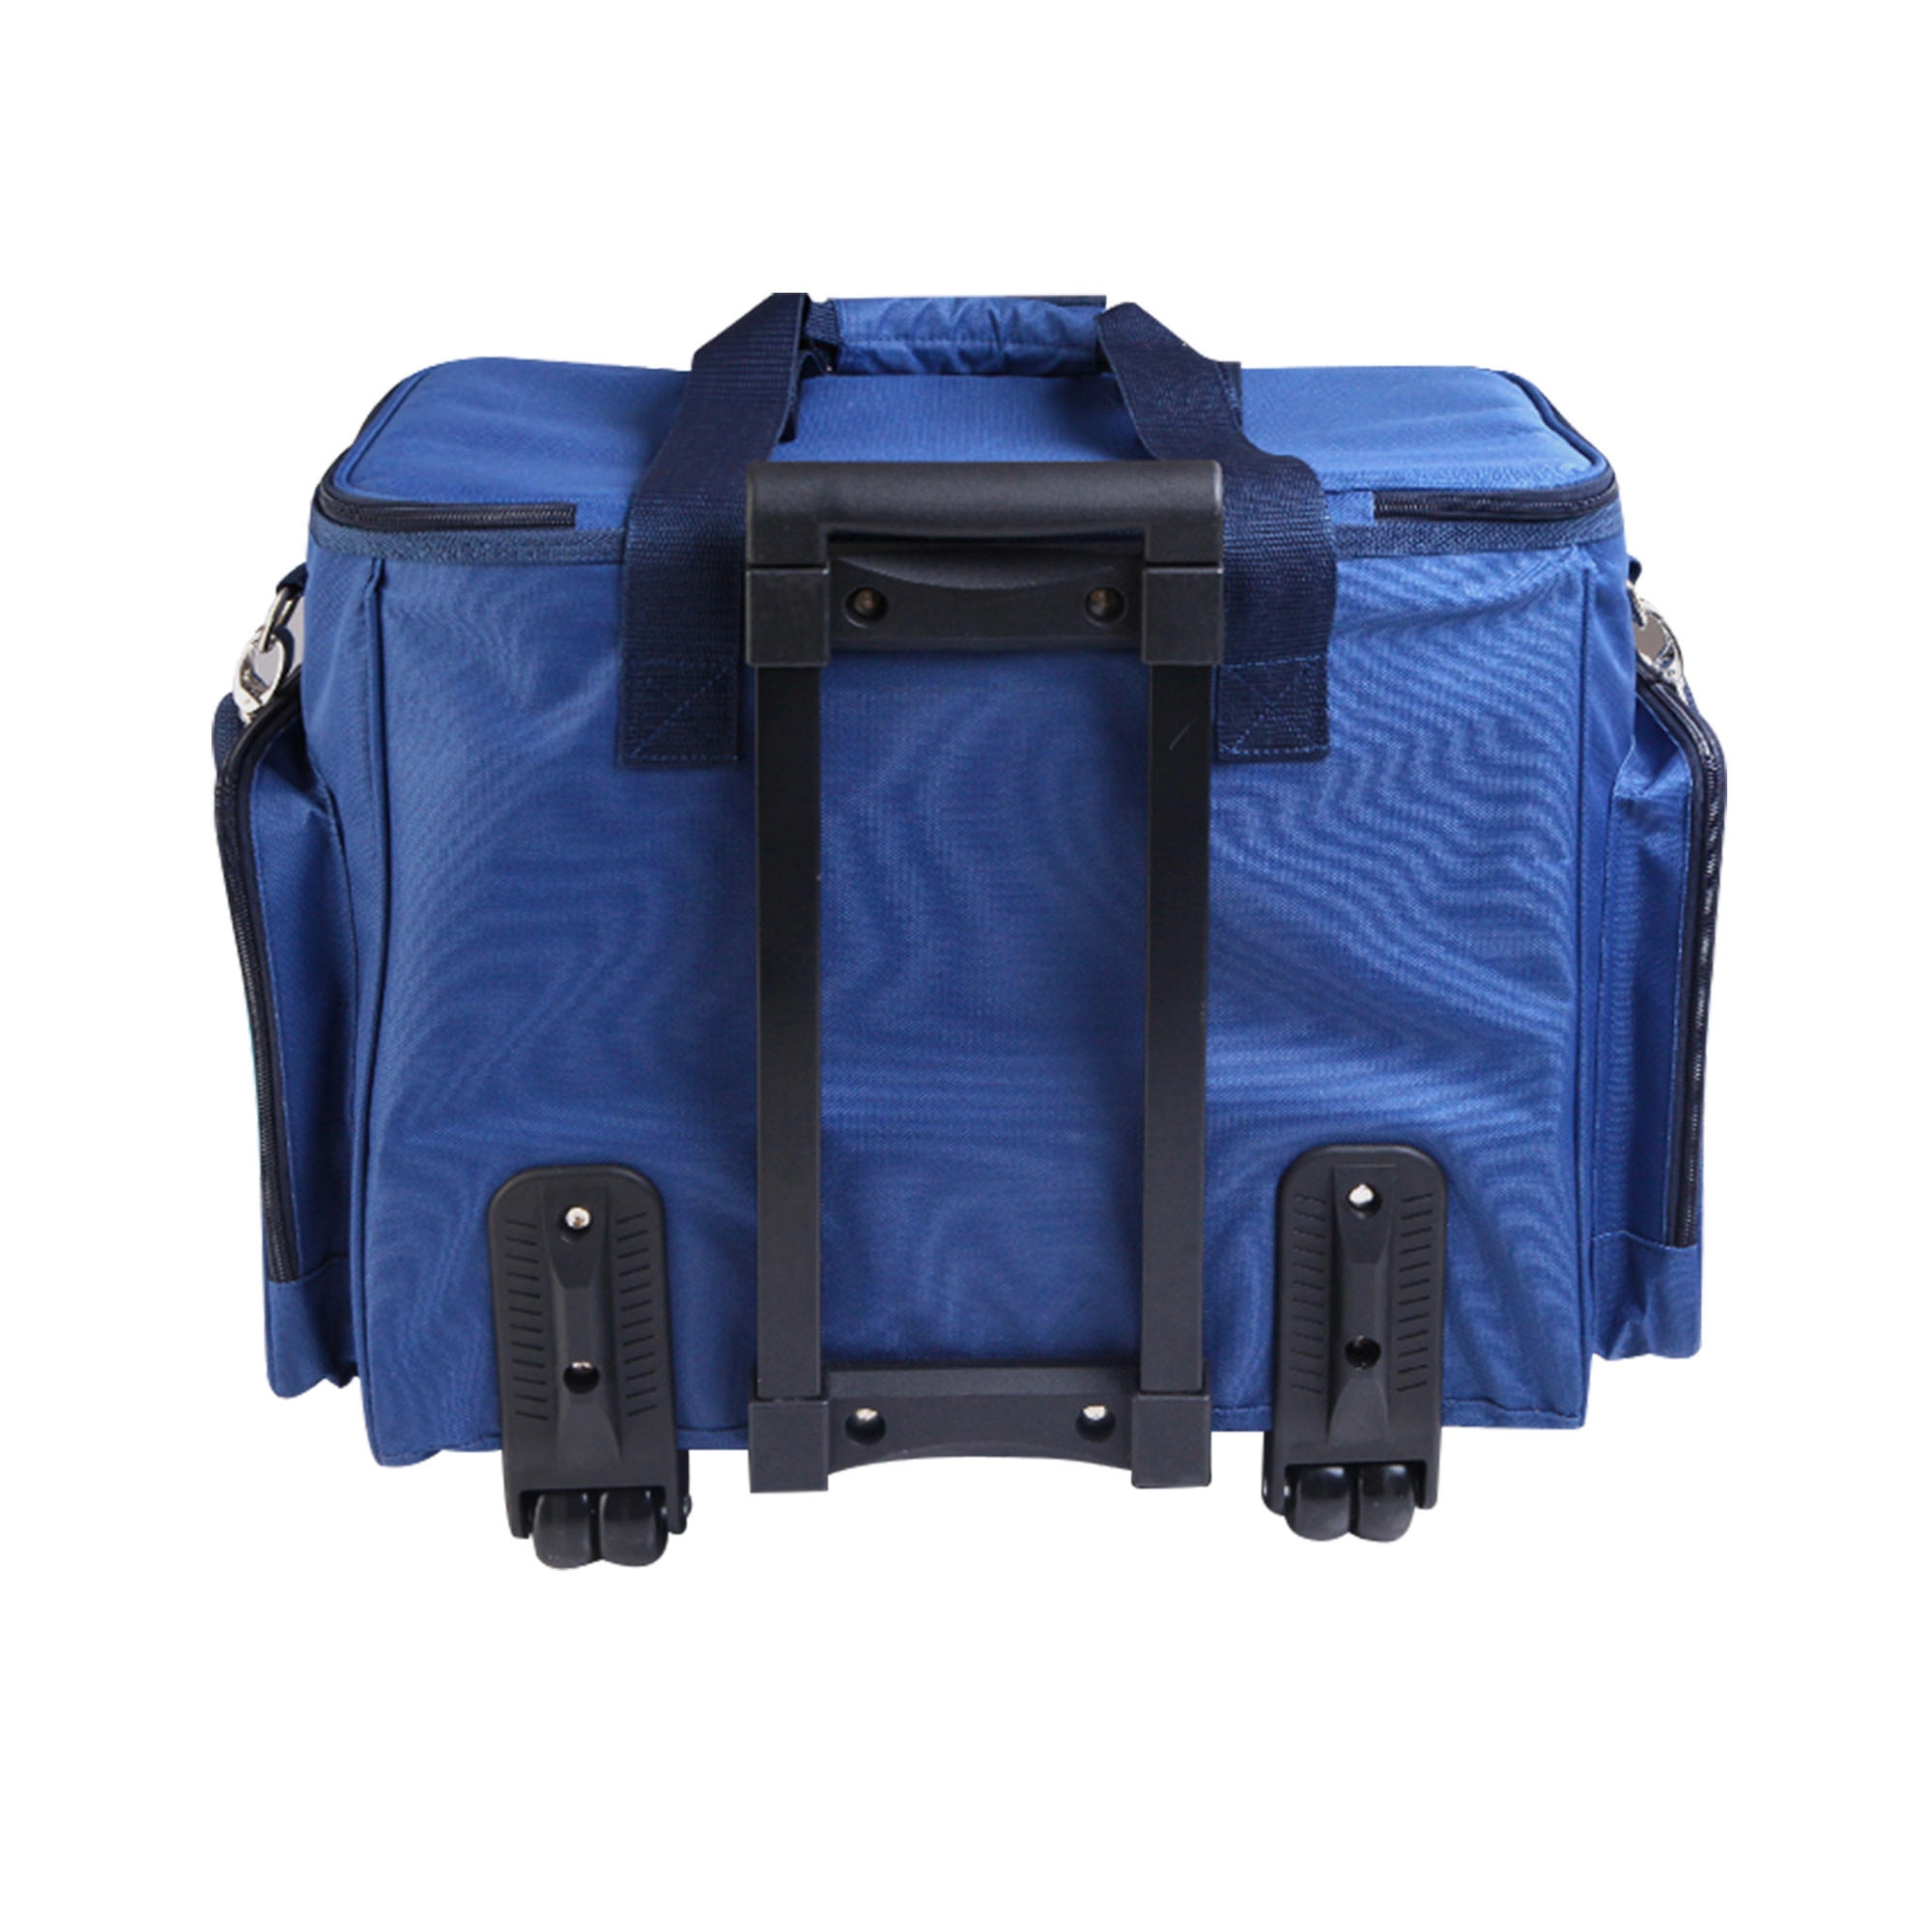 Alfresco 6 Person Insulated Picnic Bag Trolley Set Blue Image 2